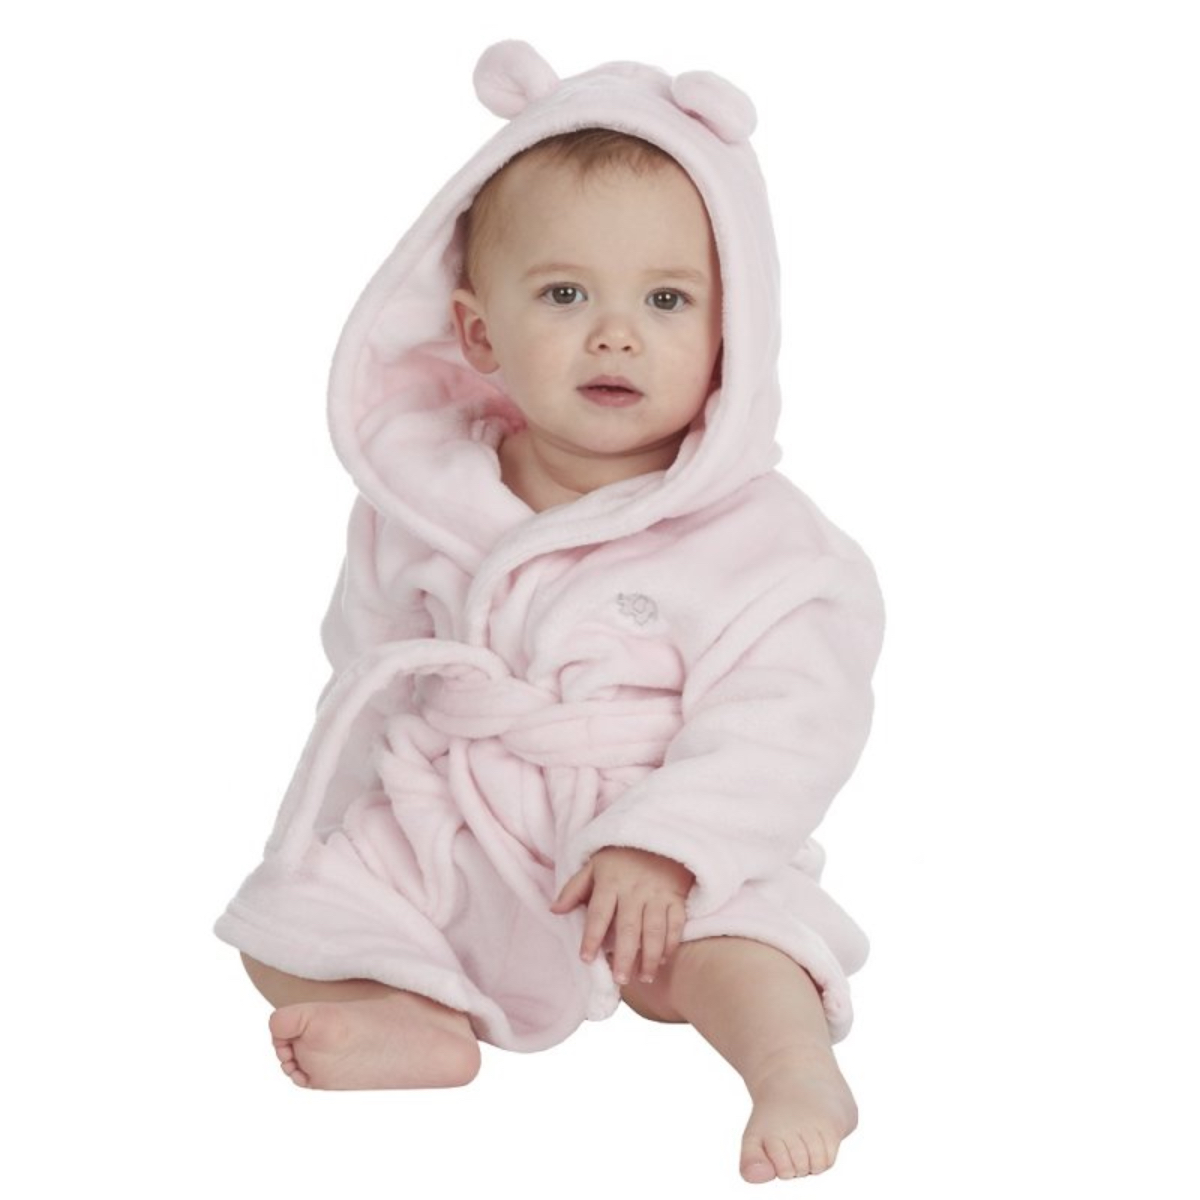 Personalised Soft Baby Grey Dressing Gown With Ears